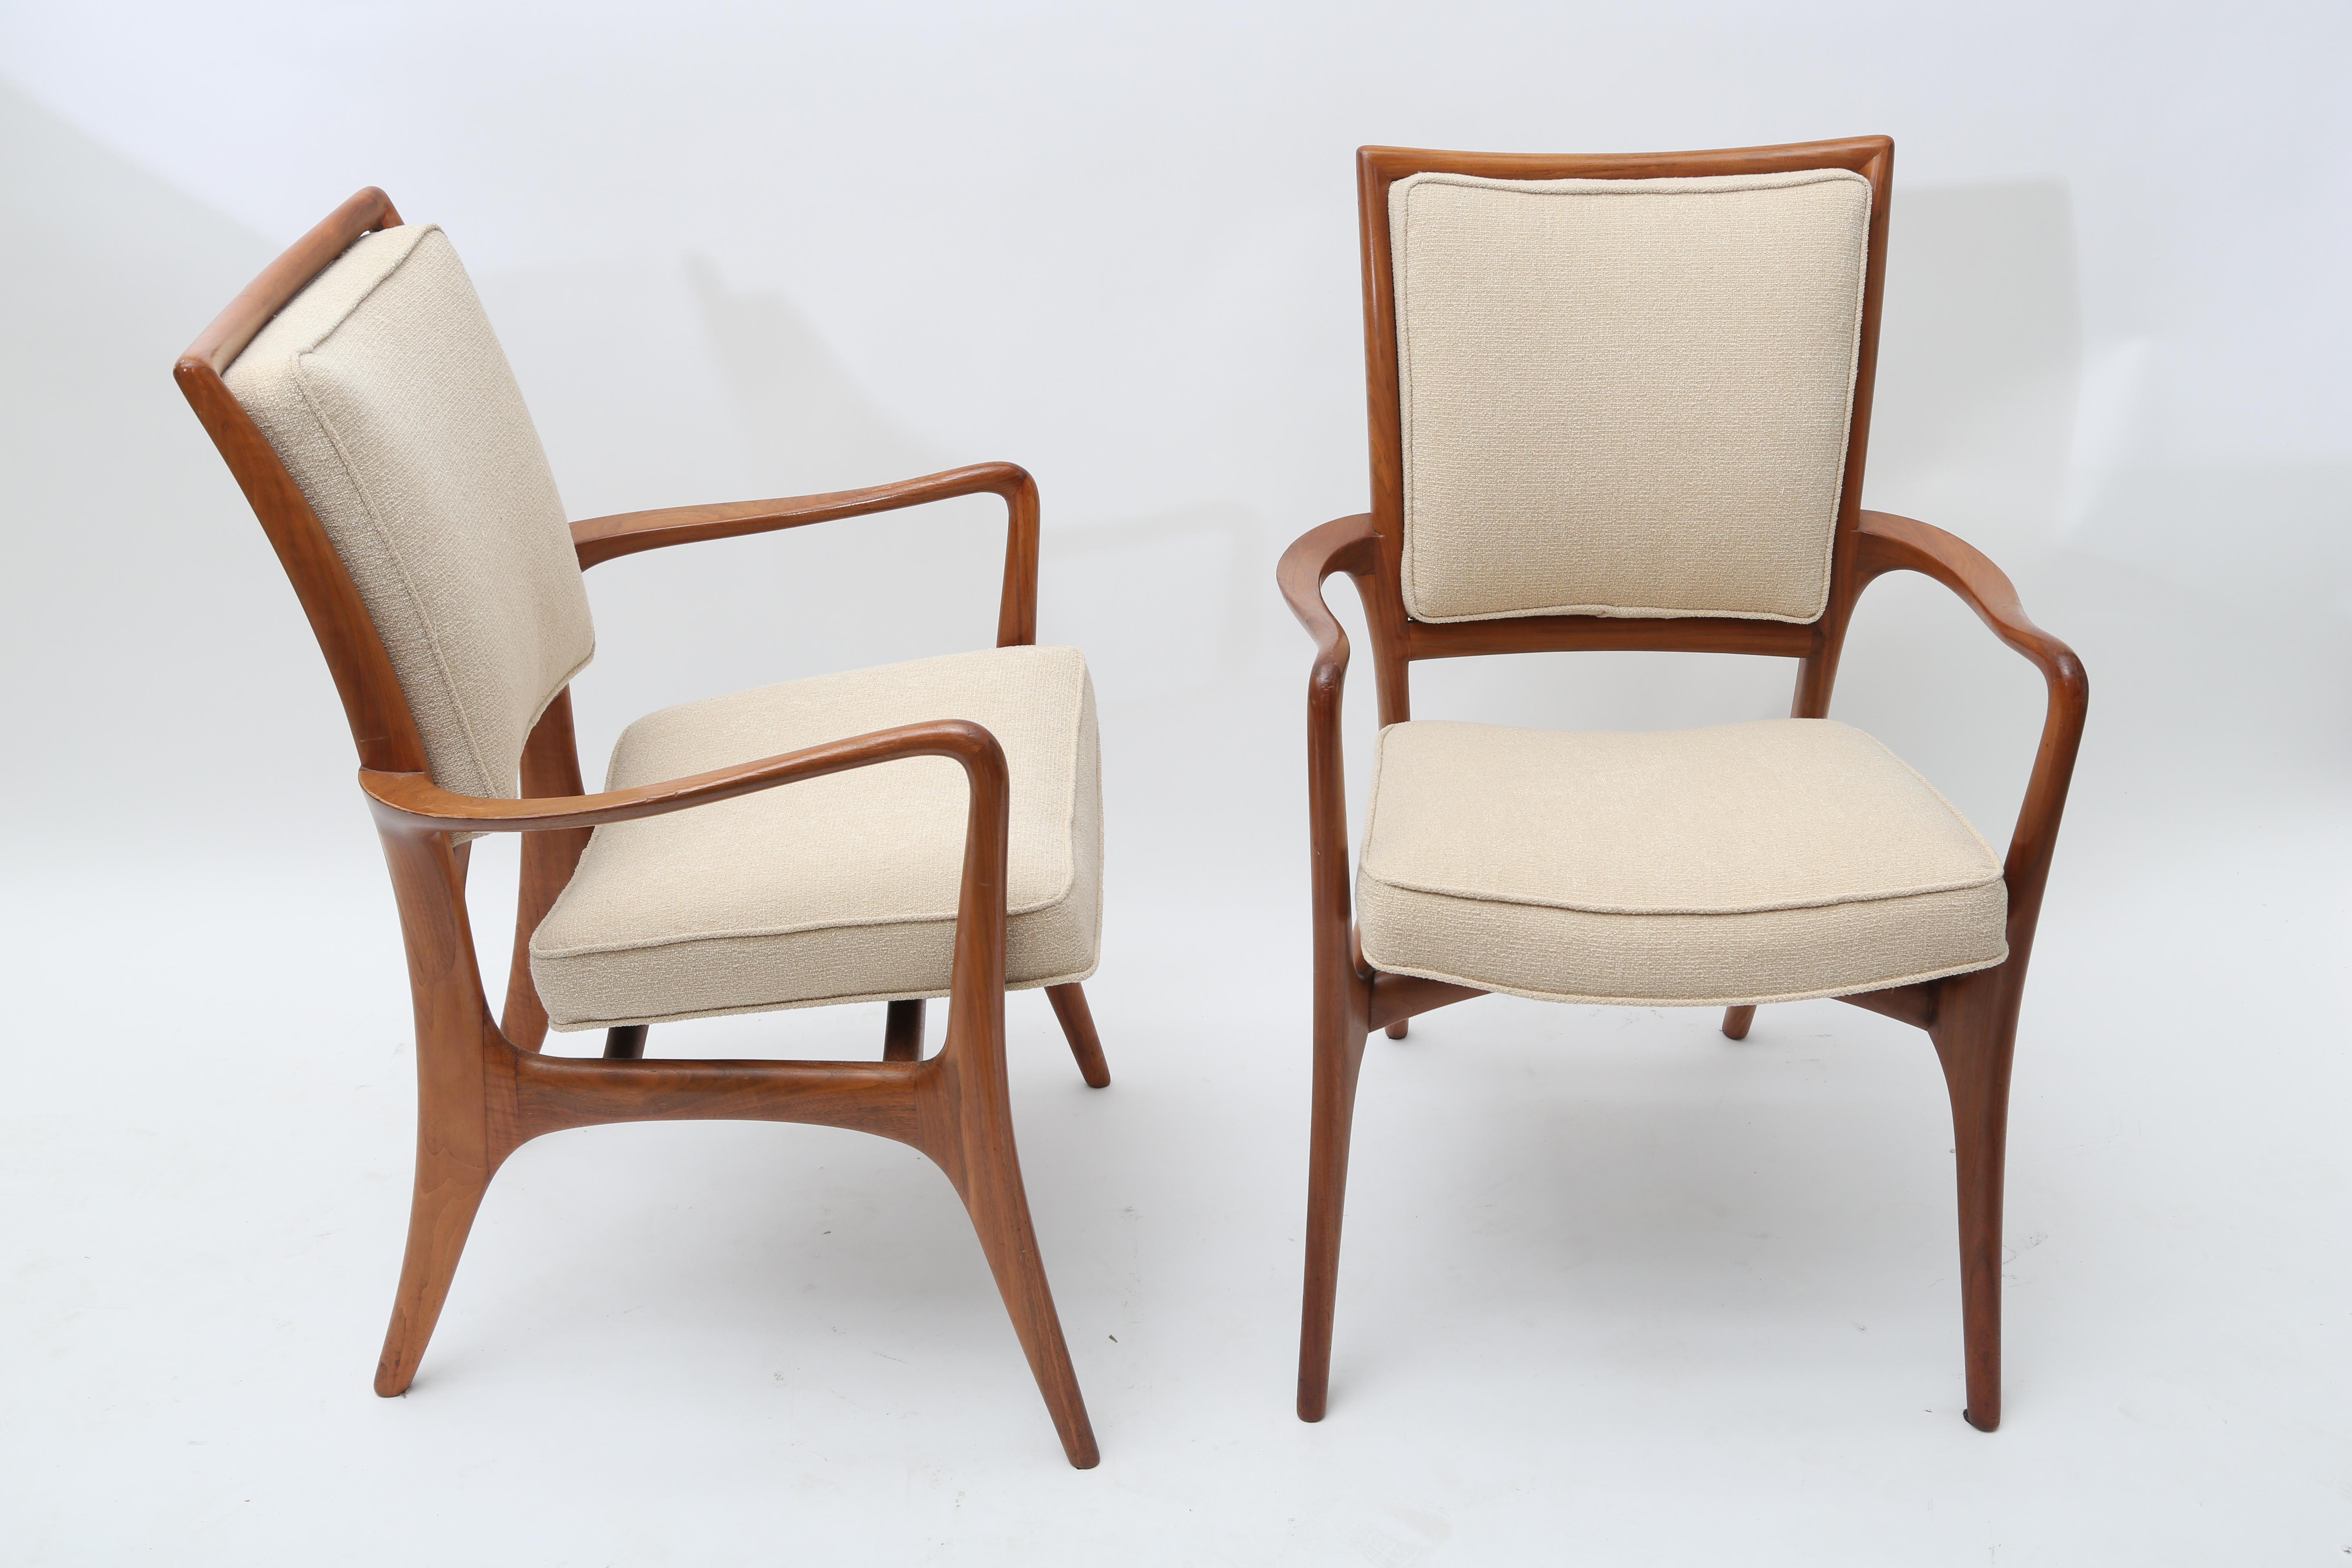 An unusual set of 6 armchairs, model 175A
From Vladimir Kagans most iconic period of organic design.
Professionally reupholstered.
Branded signatures.